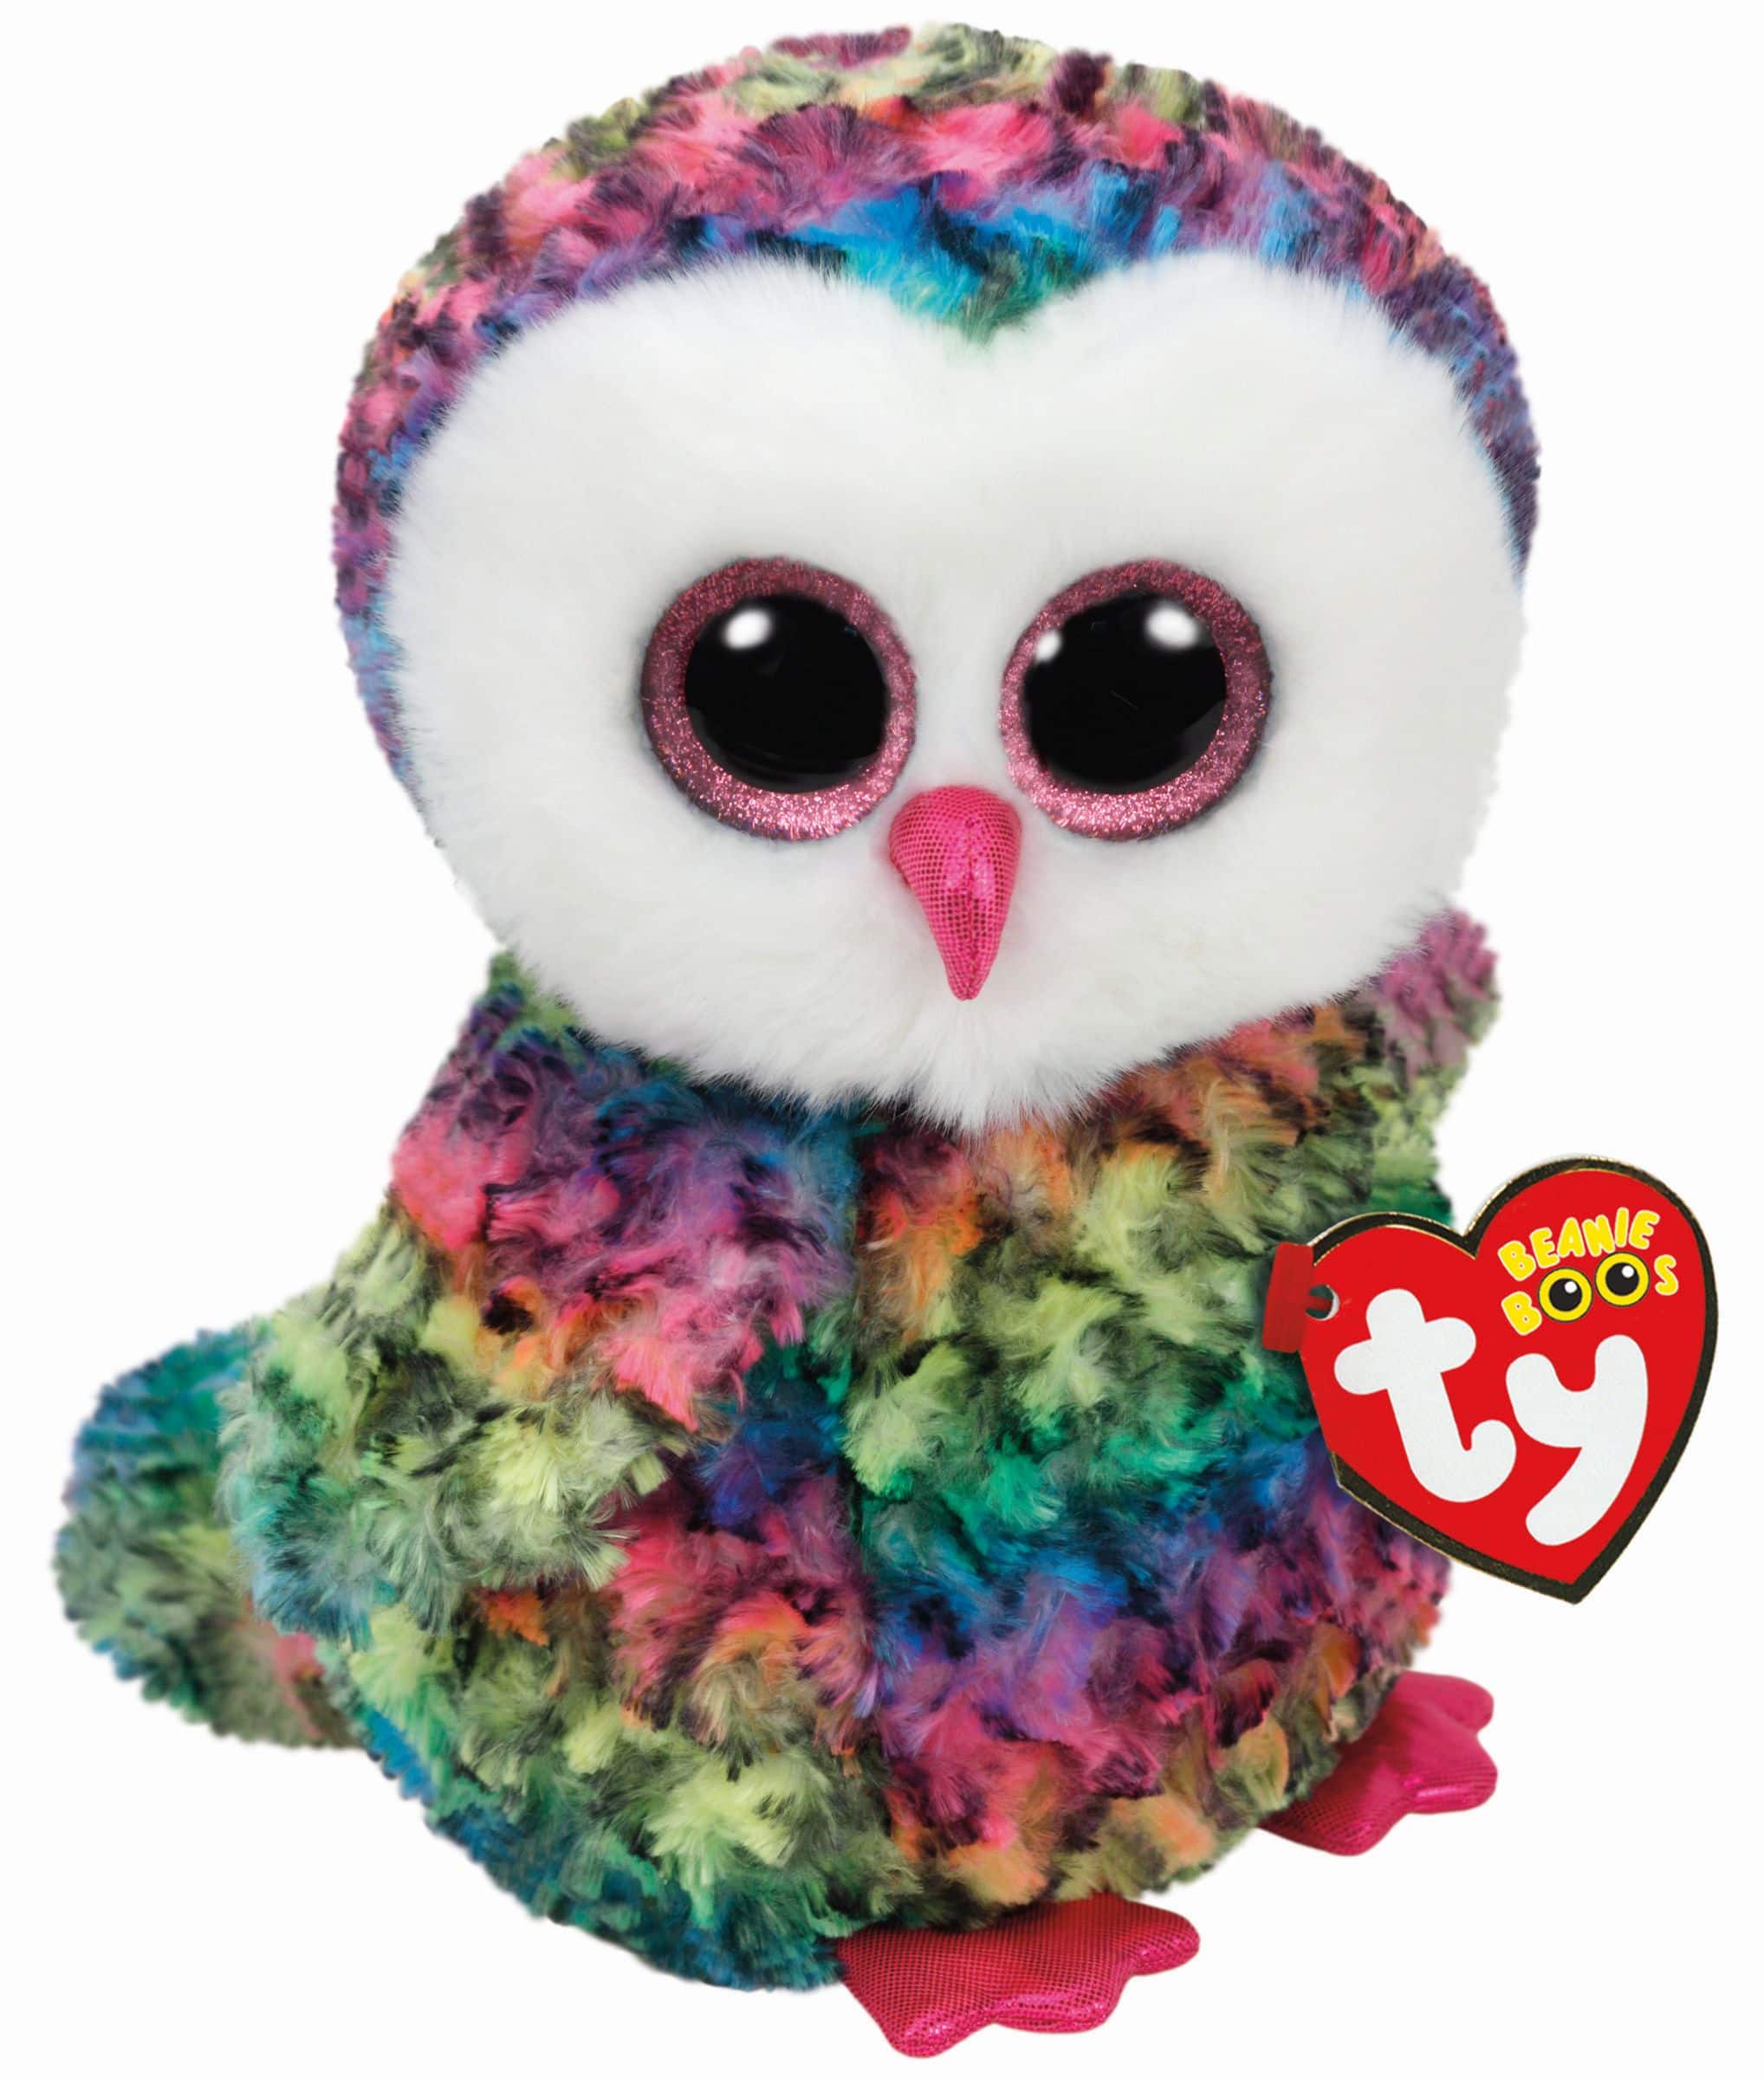 Ty Beanie Boos Owen The Multi Color Rainbow Owl 1st Version 6" Retired 2017 for sale online 